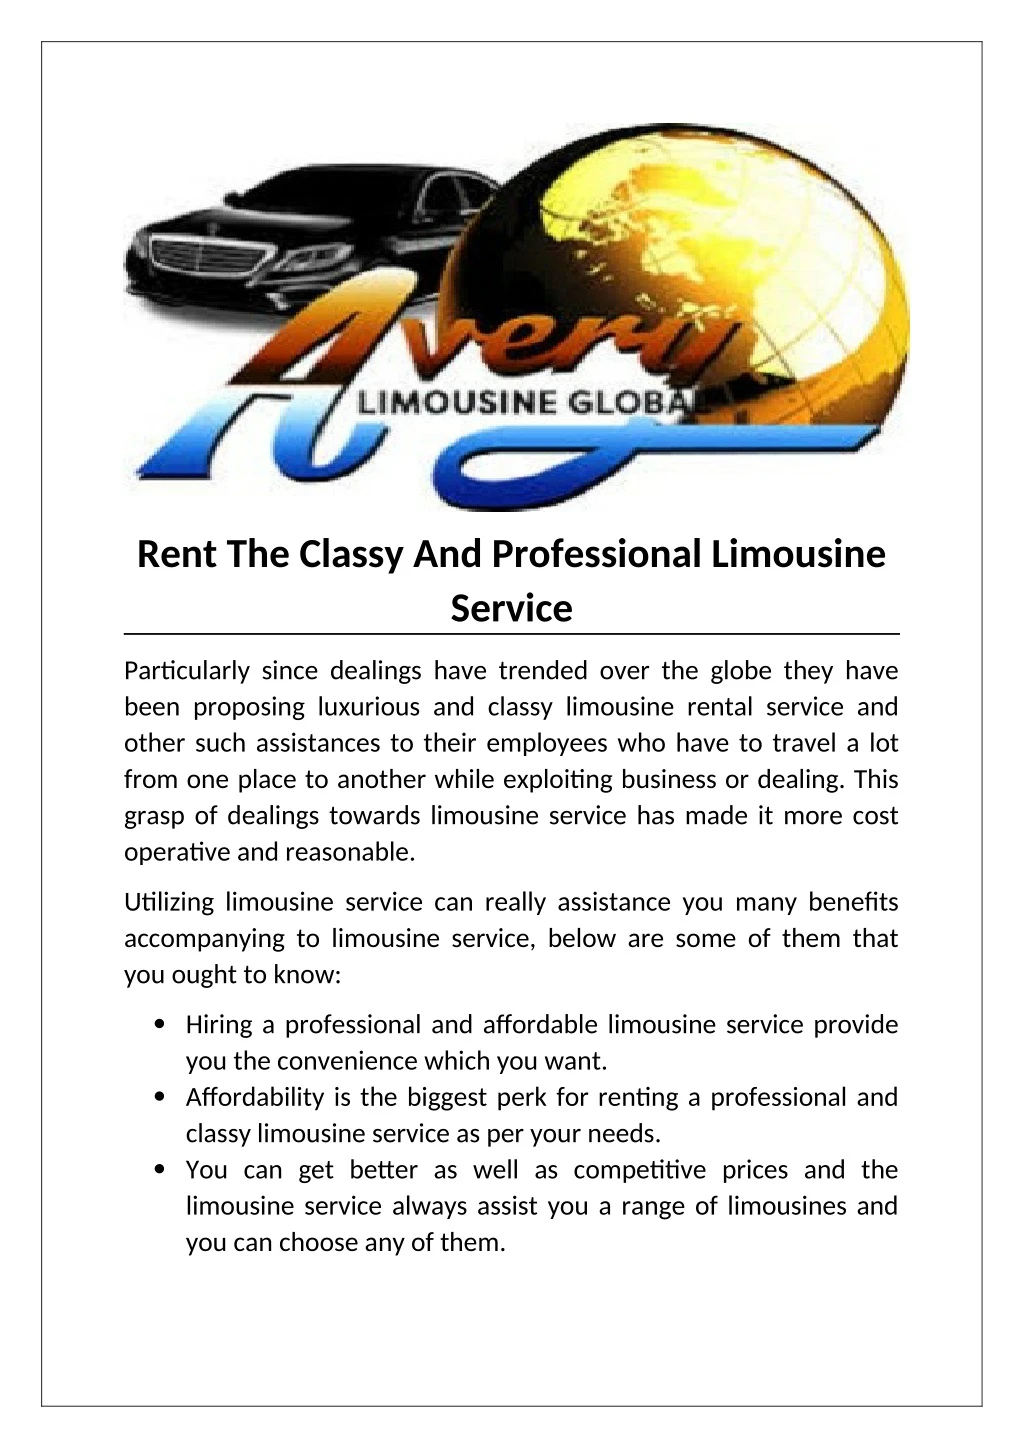 rent the classy and professional limousine service